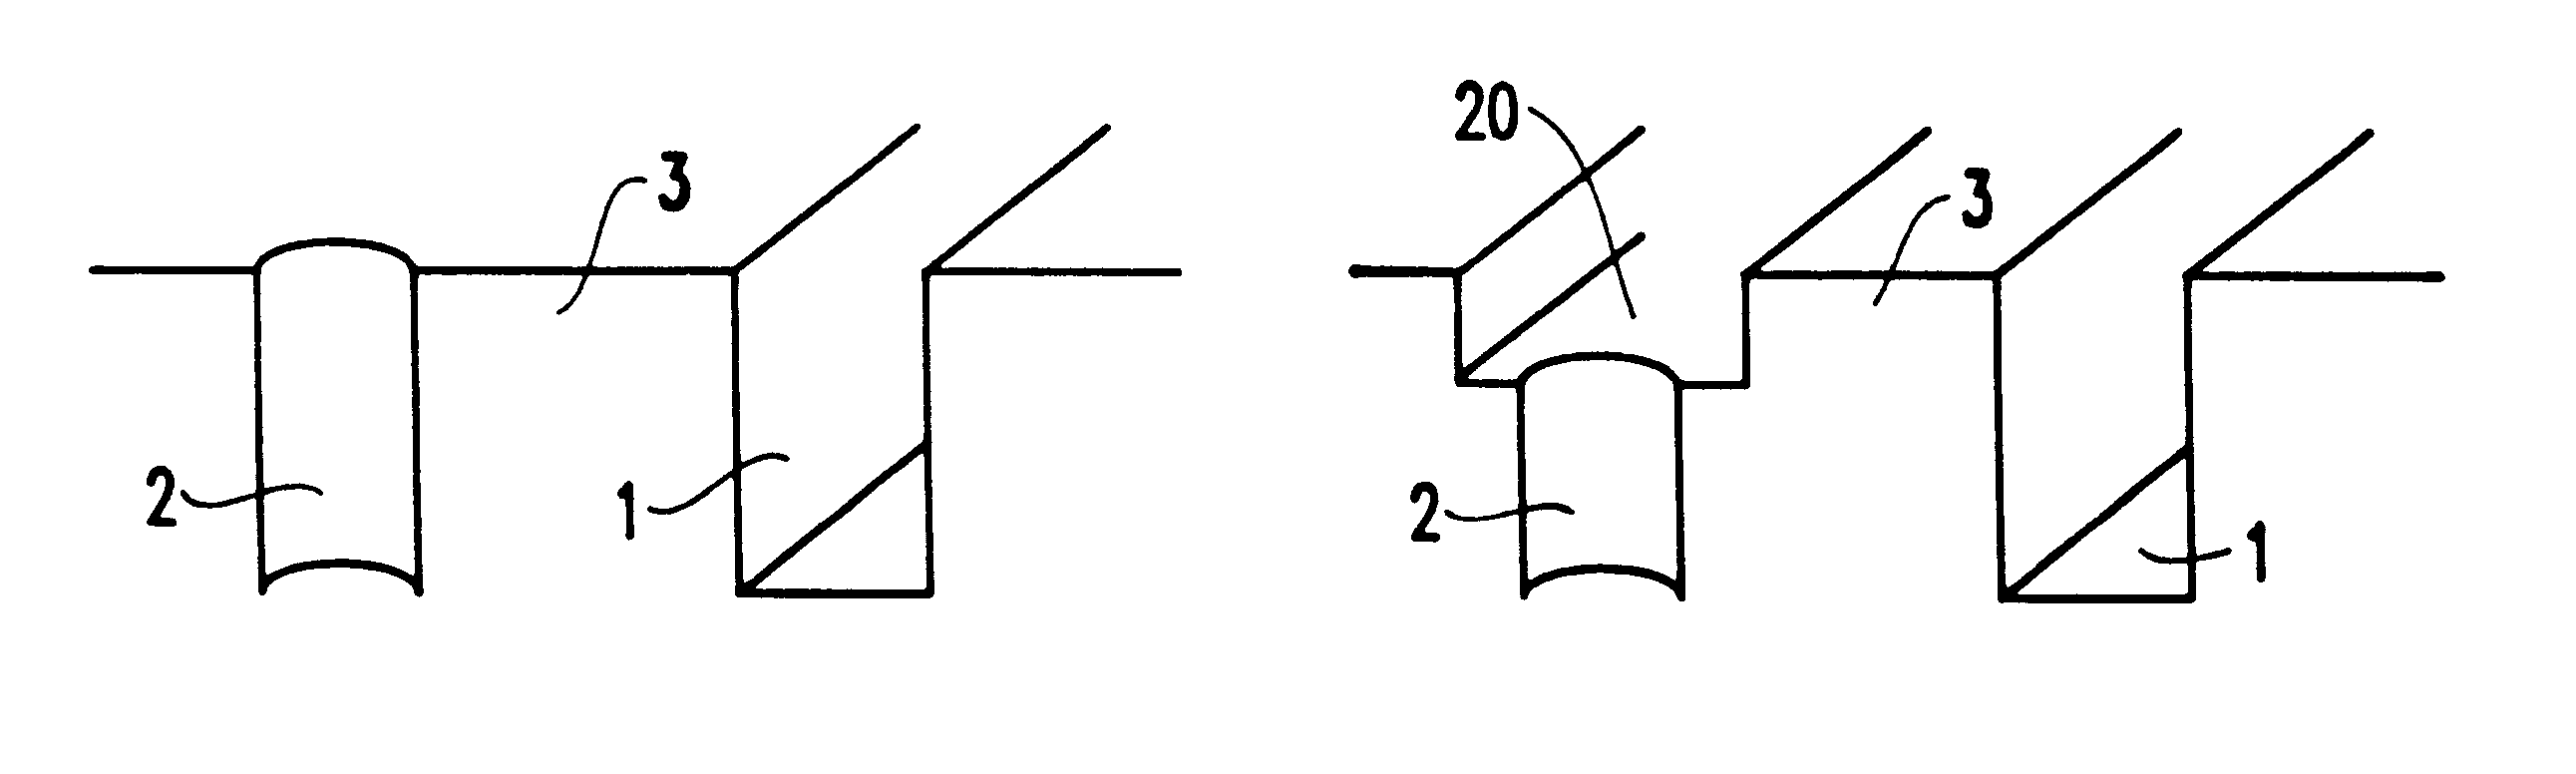 Slotted damascene lines for low resistive wiring lines for integrated circuit